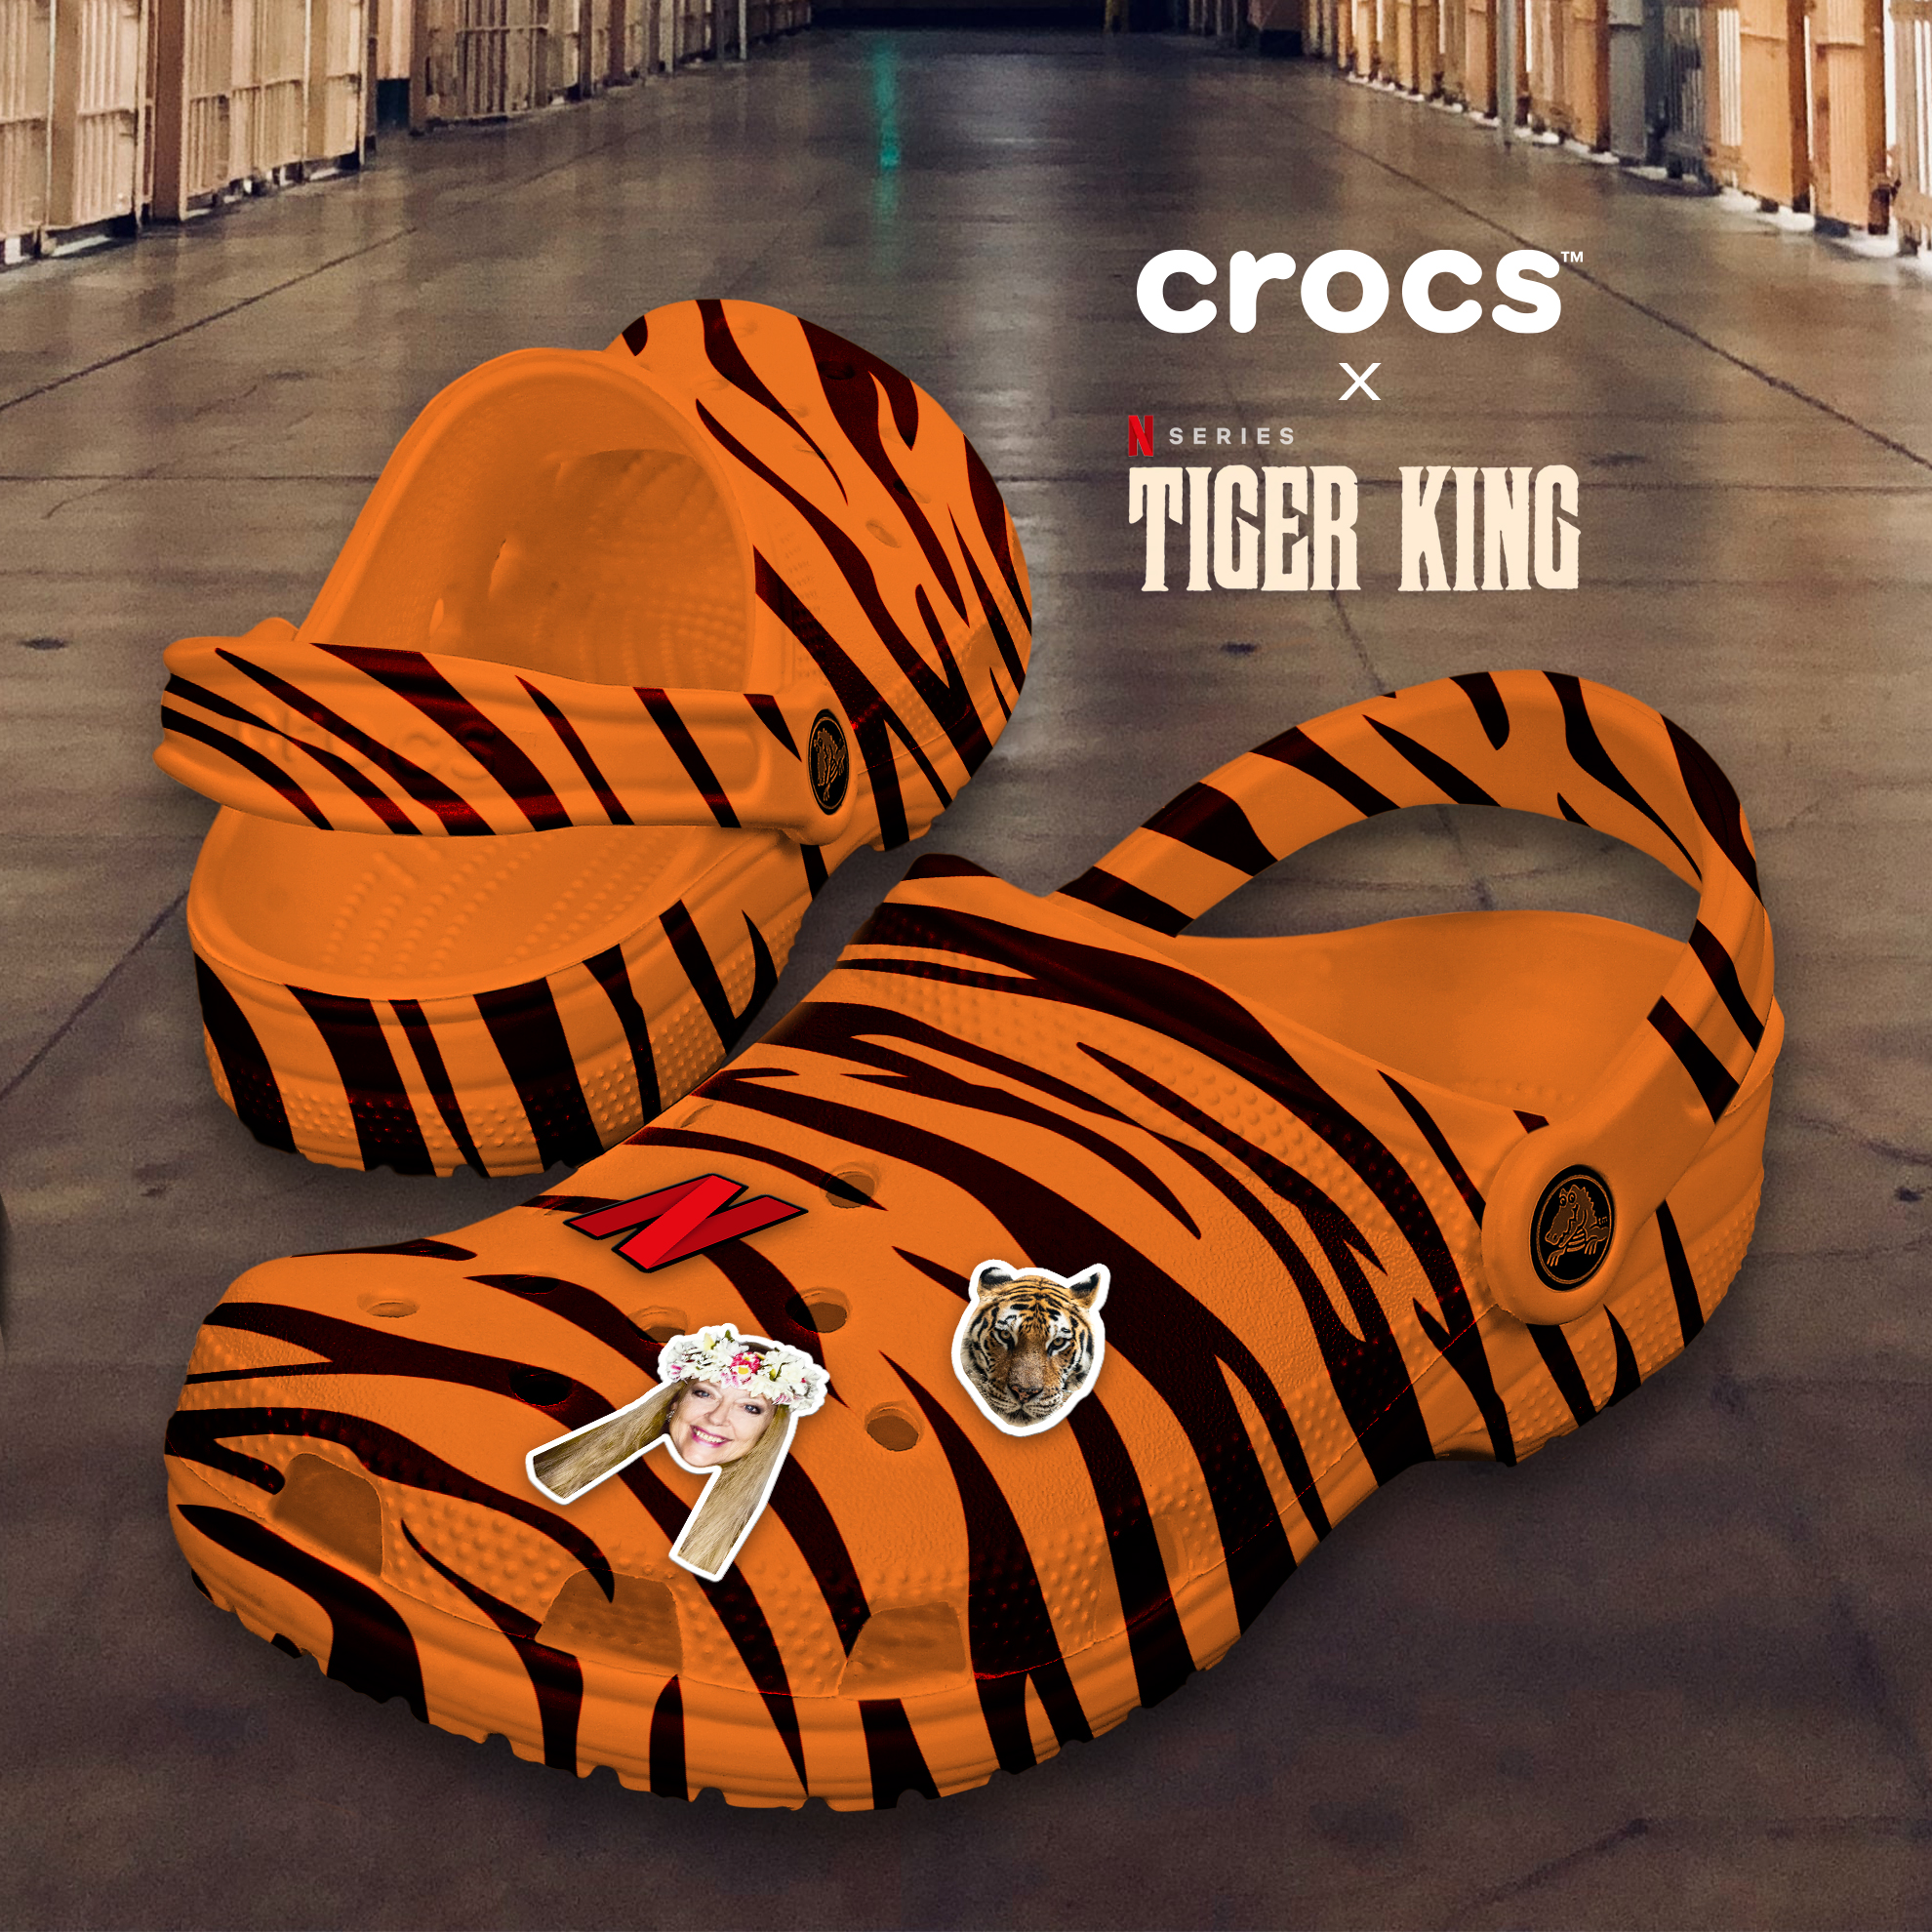 connective3 on Twitter: "Our design team have their take on some pop culture @Crocs👟 of @netflix King? We have some themed crocs for all you 'cool cats and kittens' out